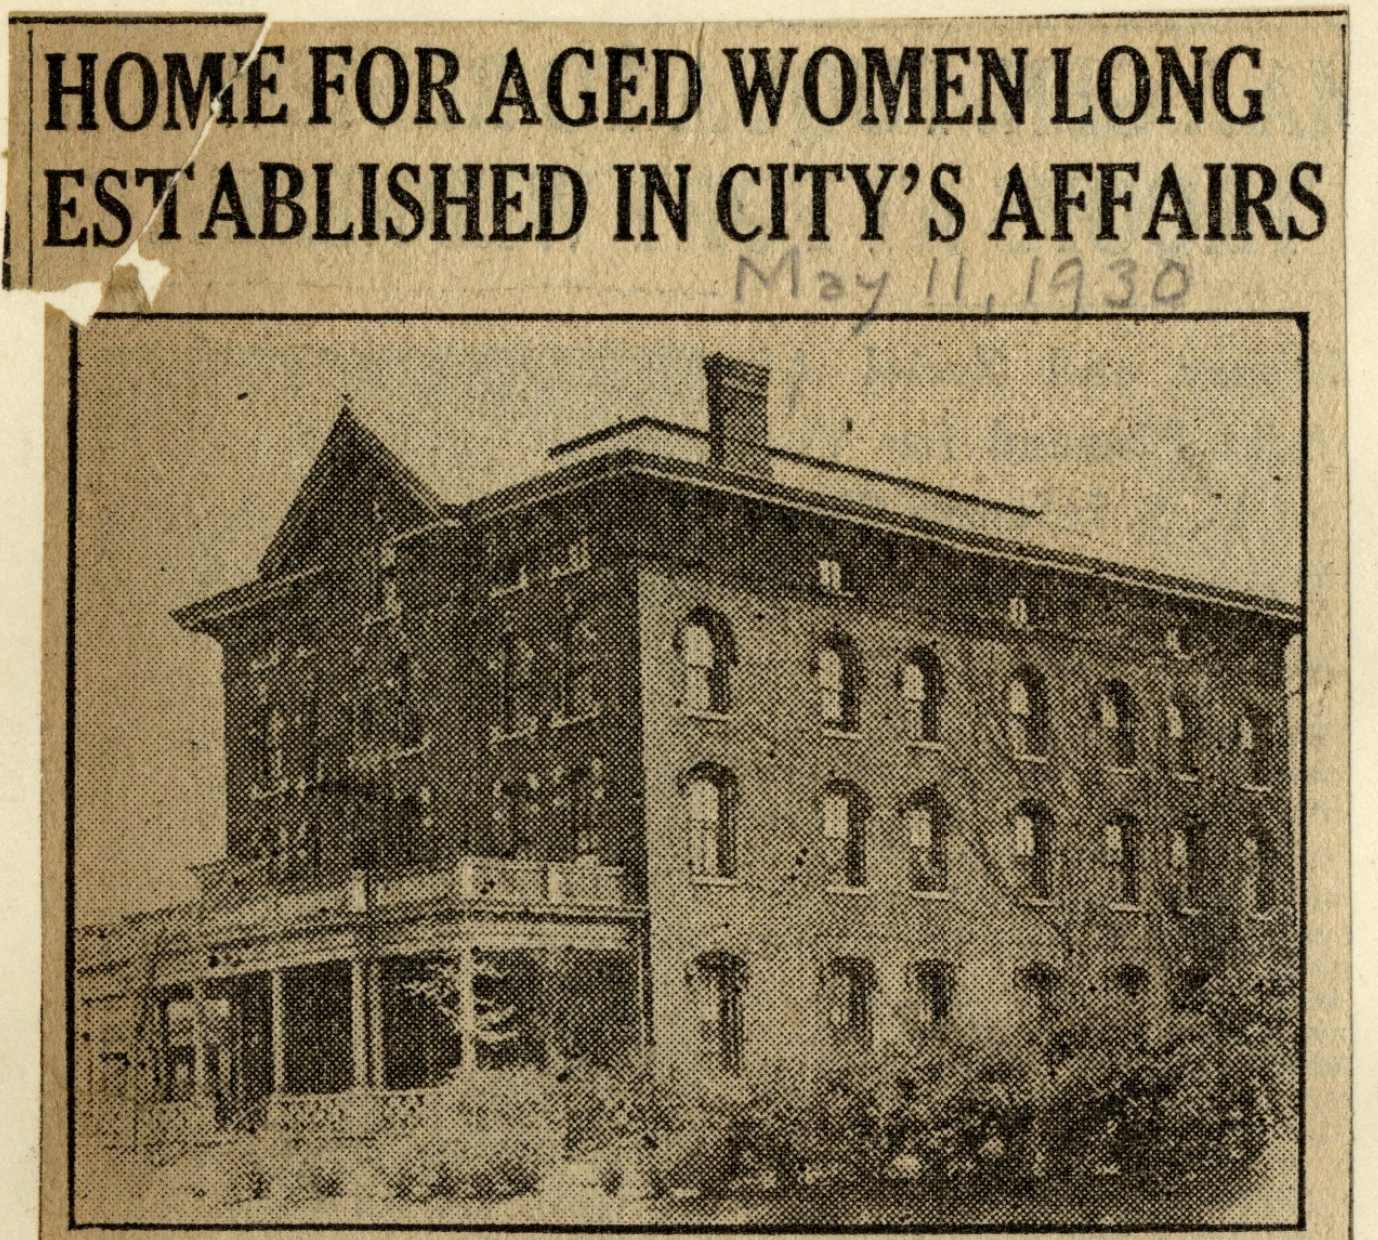 Yellowed newspaper clipping with headline "Home For Aged Women Long Established in City's Affairs" shows a four-story brick building with arched windows and a front porch.